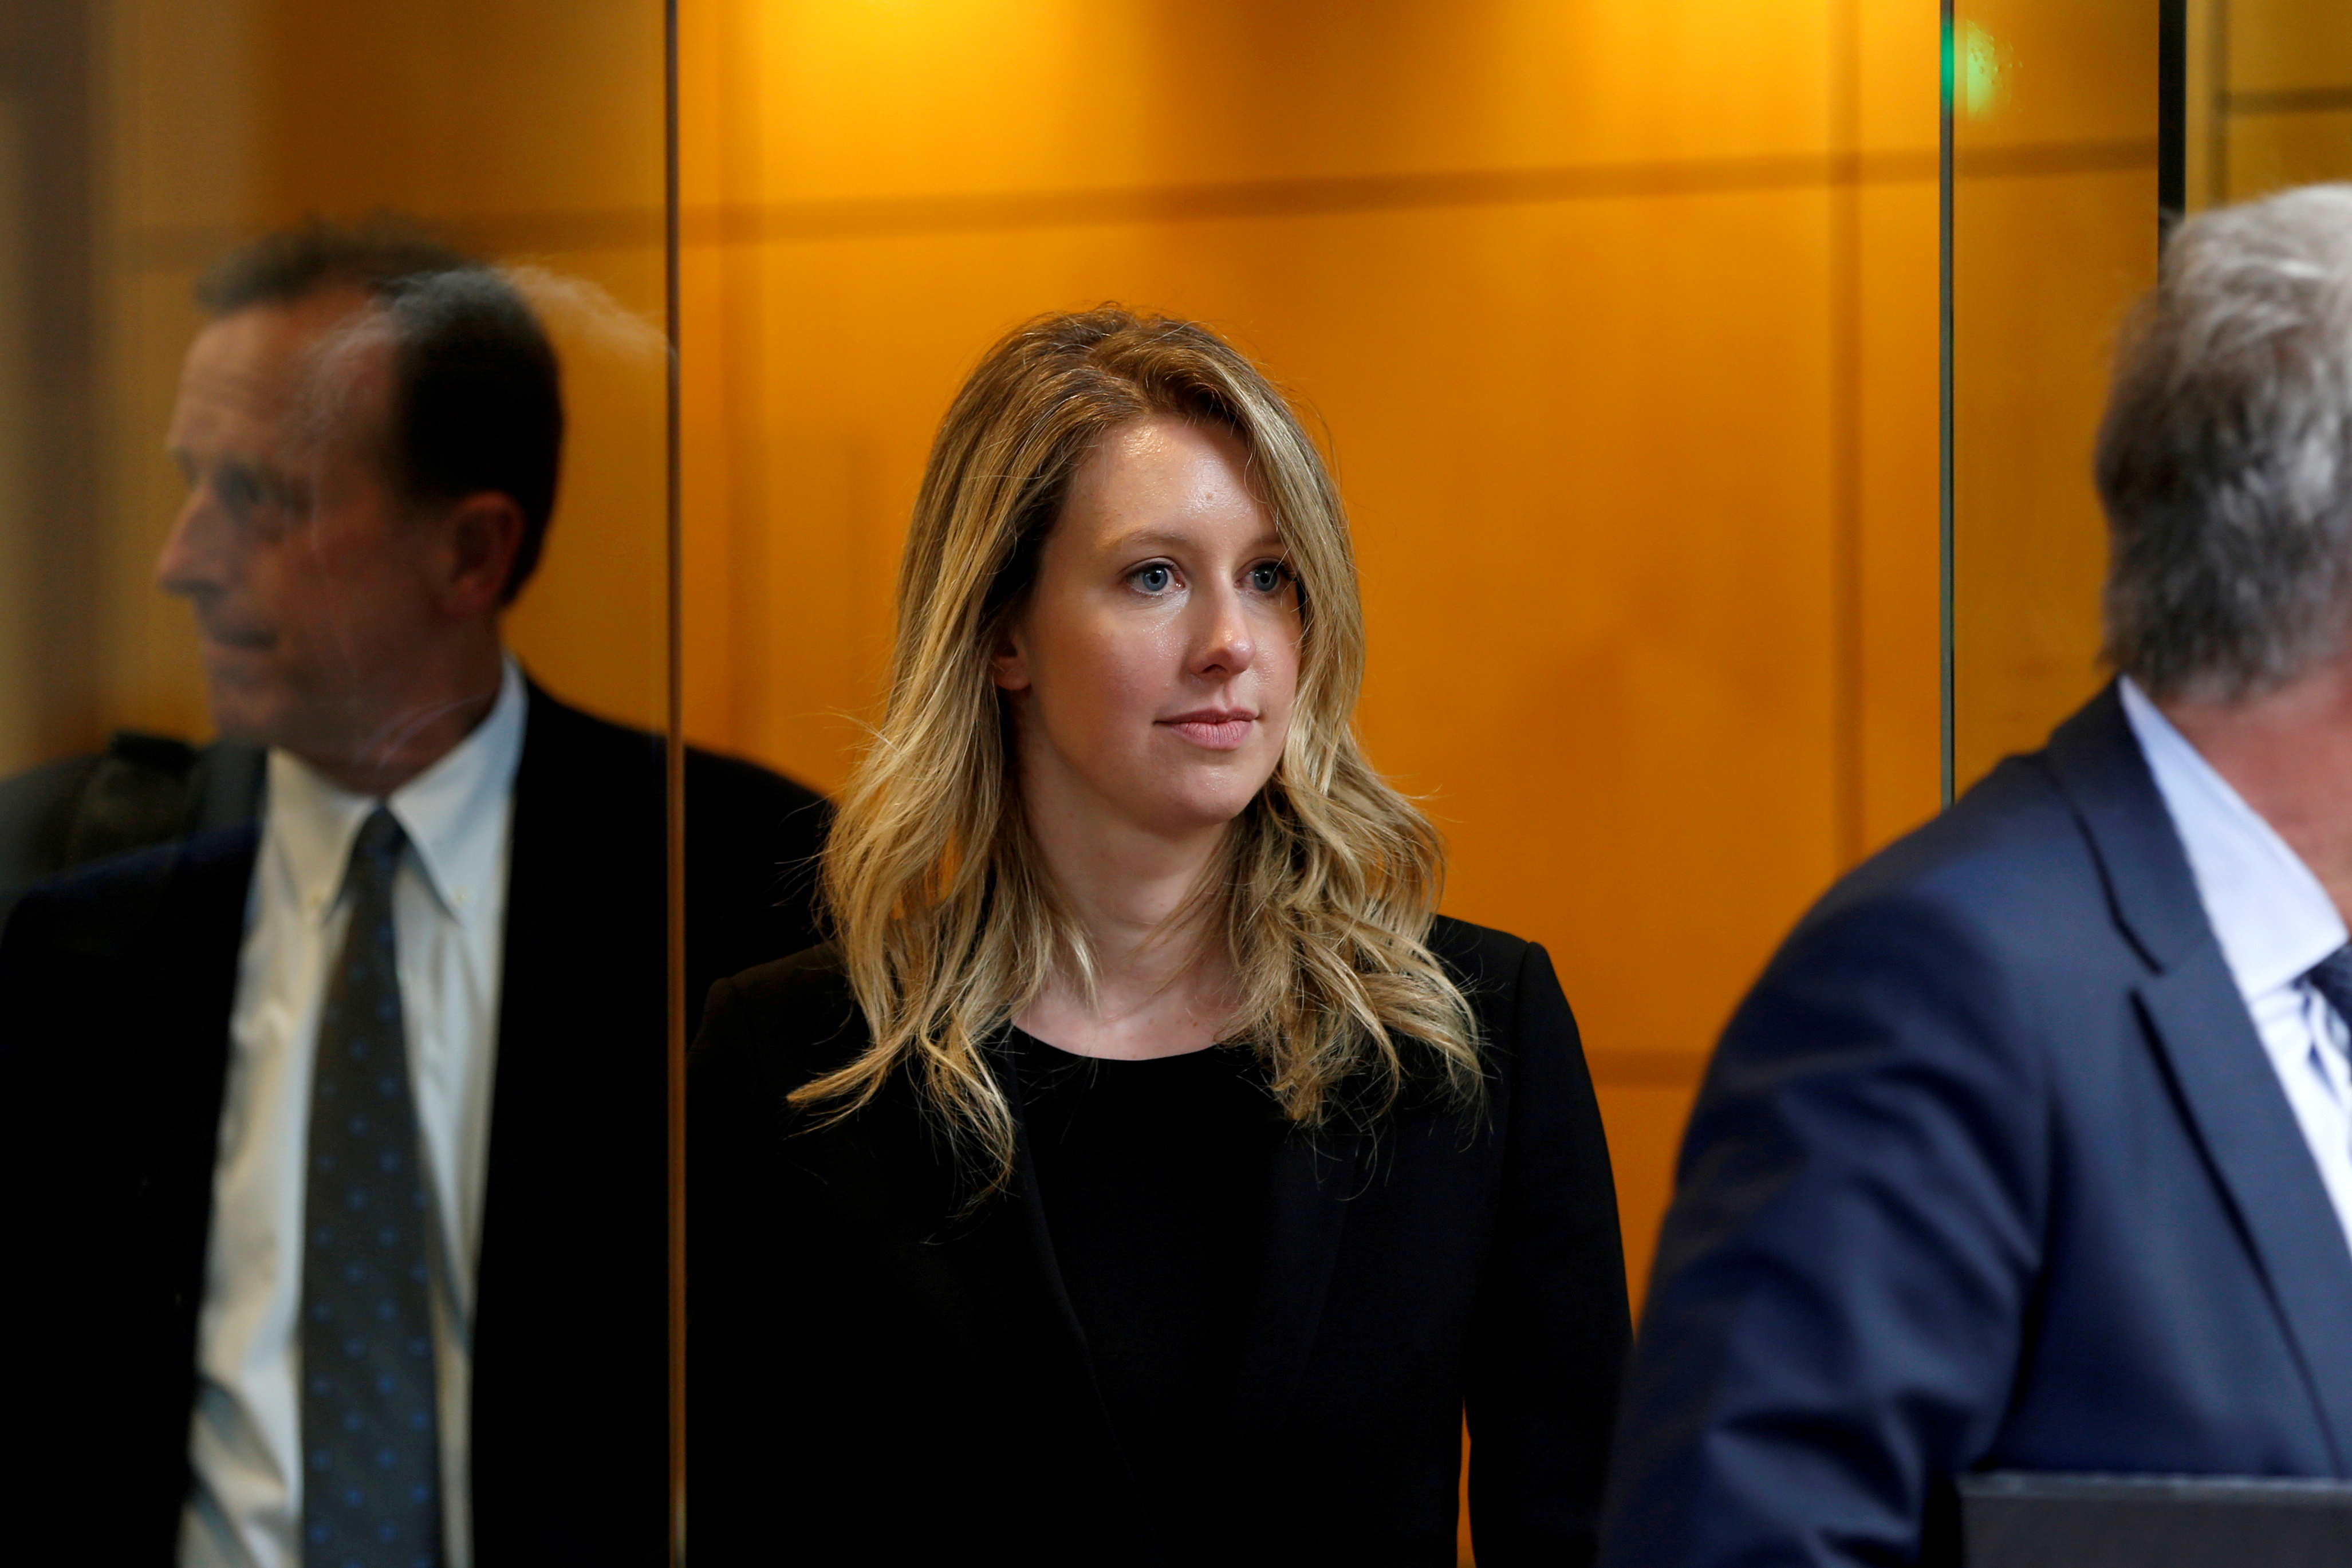 Former Theranos CEO Elizabeth Holmes leaves after a hearing at a federal court in San Jose, California, July 17, U.S., 2019.  REUTERS/Stephen Lam